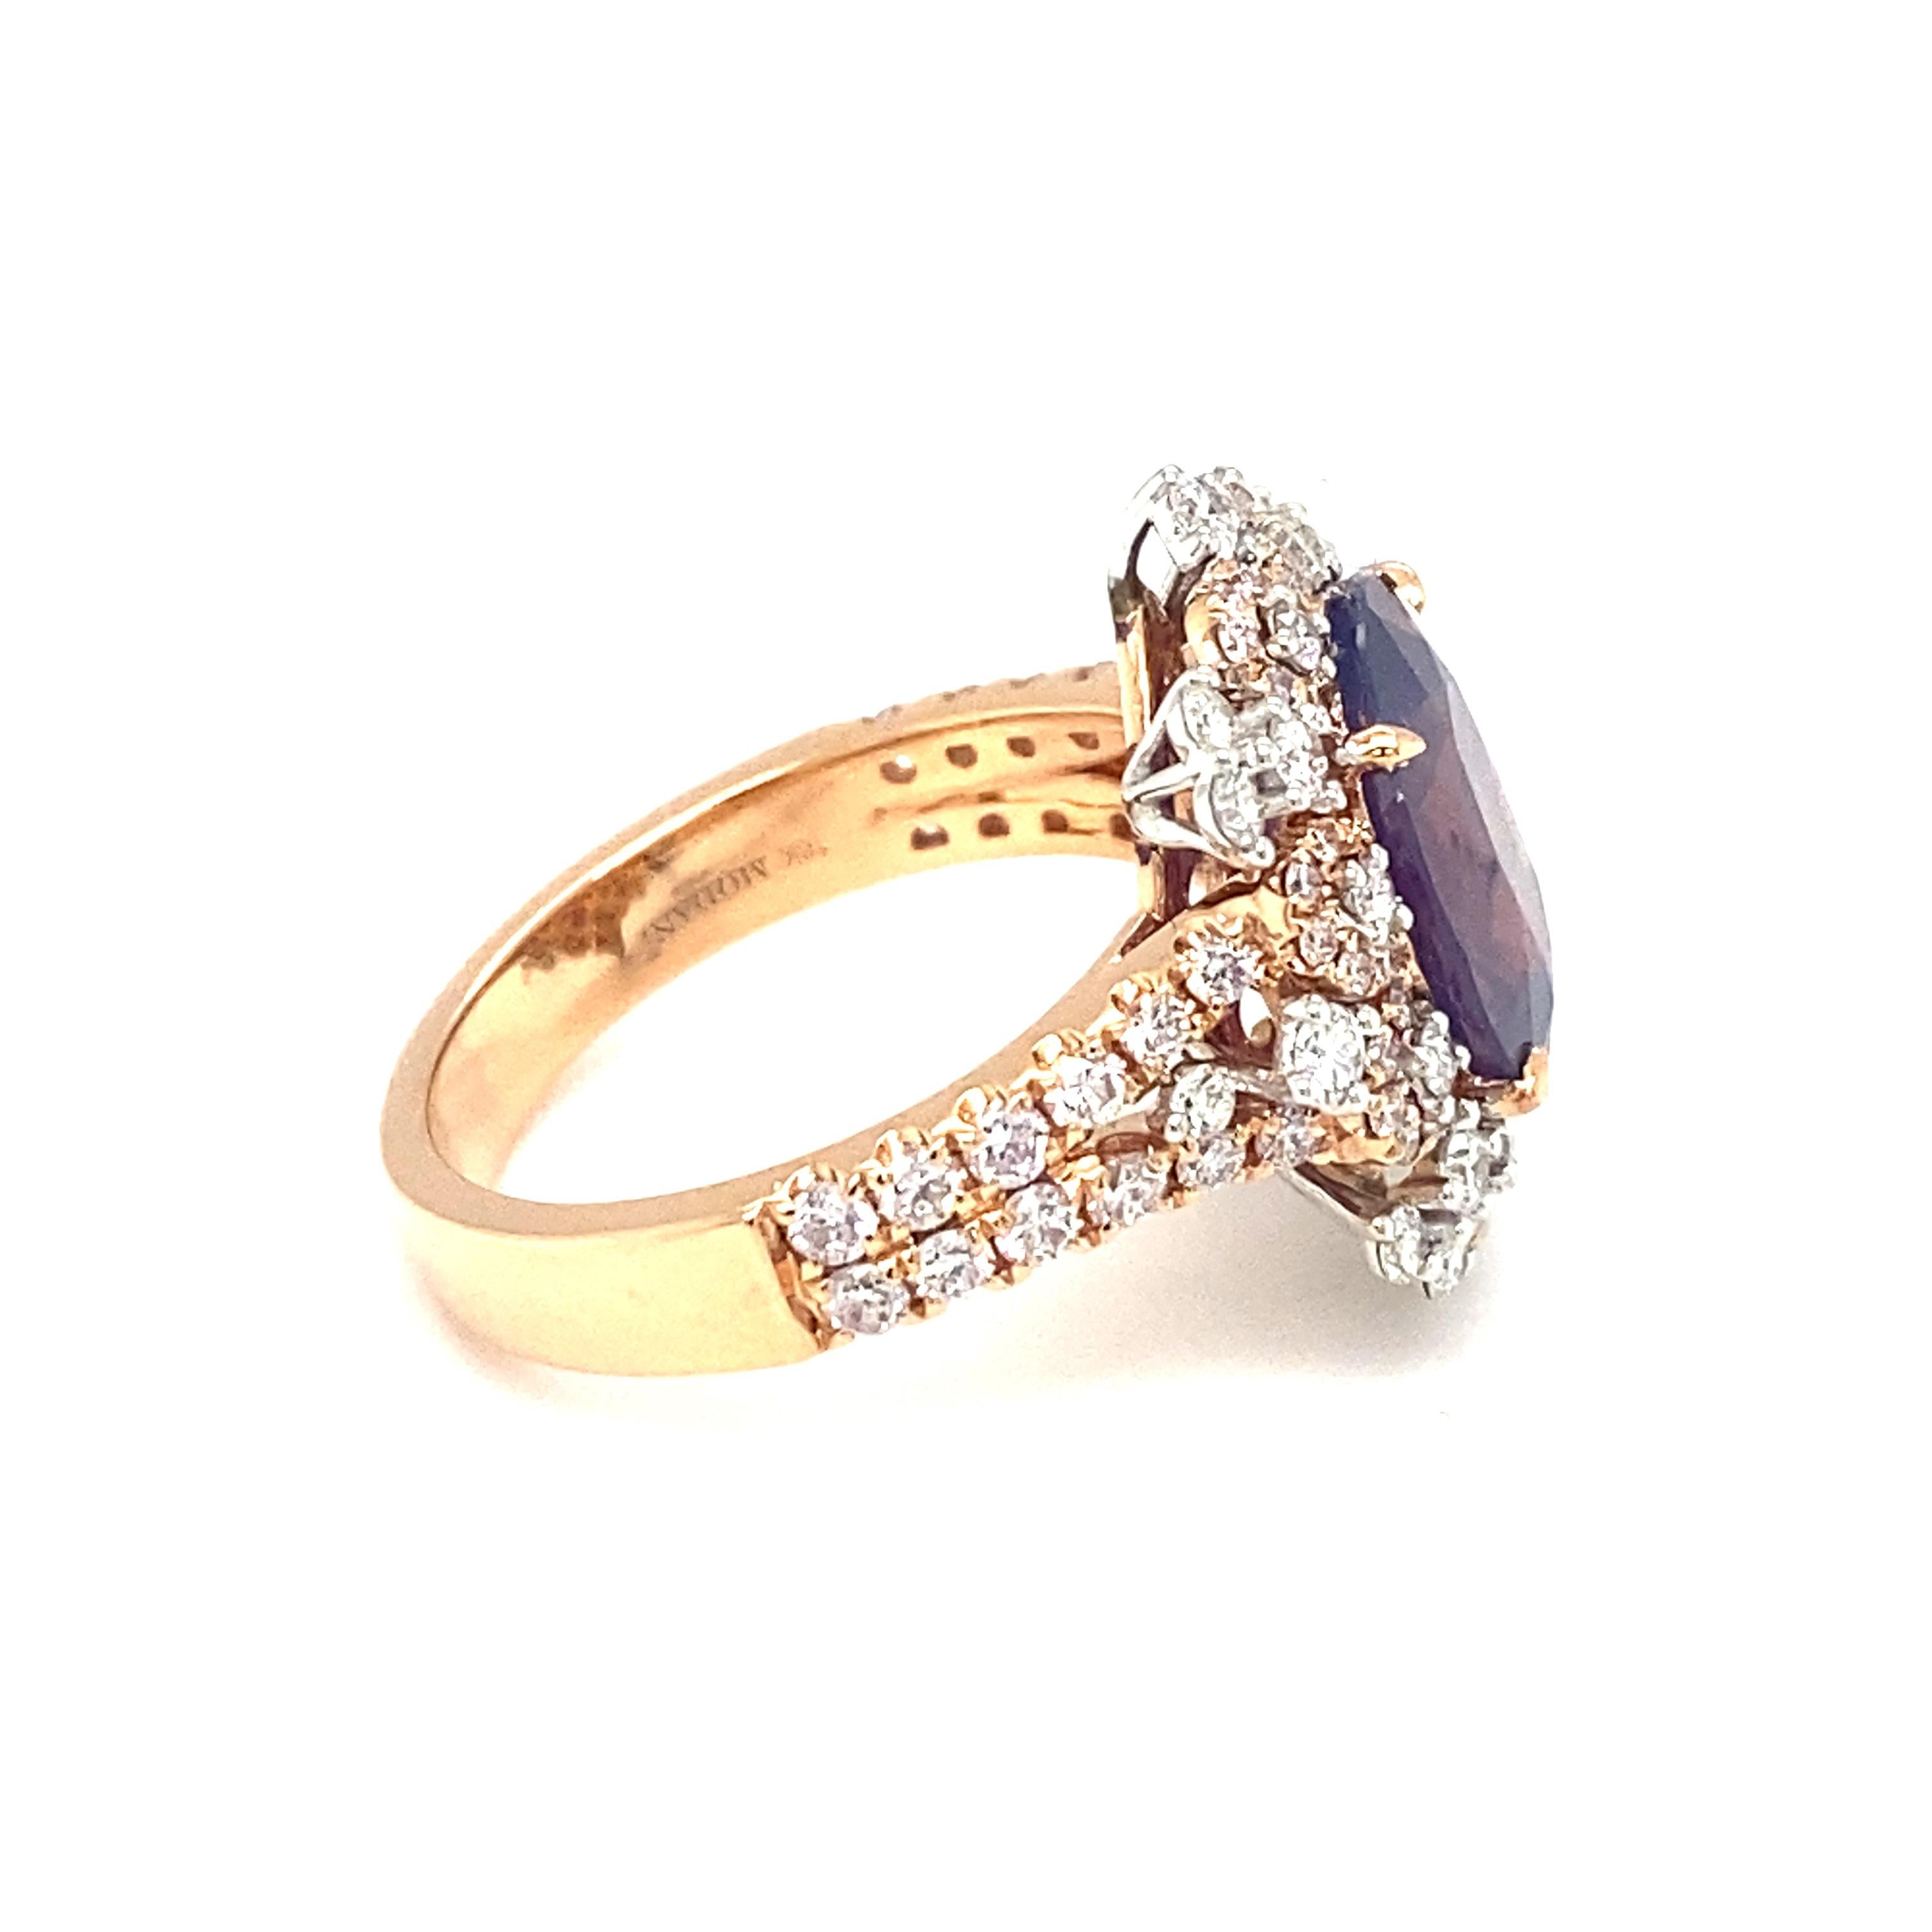 Item Details: This ring by MODANI features a spectacular center purplish-pink sapphire with a halo of accent diamonds.

Circa: 2000s
Metal Type: 18 Karat Rose Gold
Weight: 7.2 grams
Size: US 7.25, resizable

Diamond Details:
Carat: 0.75 carat total